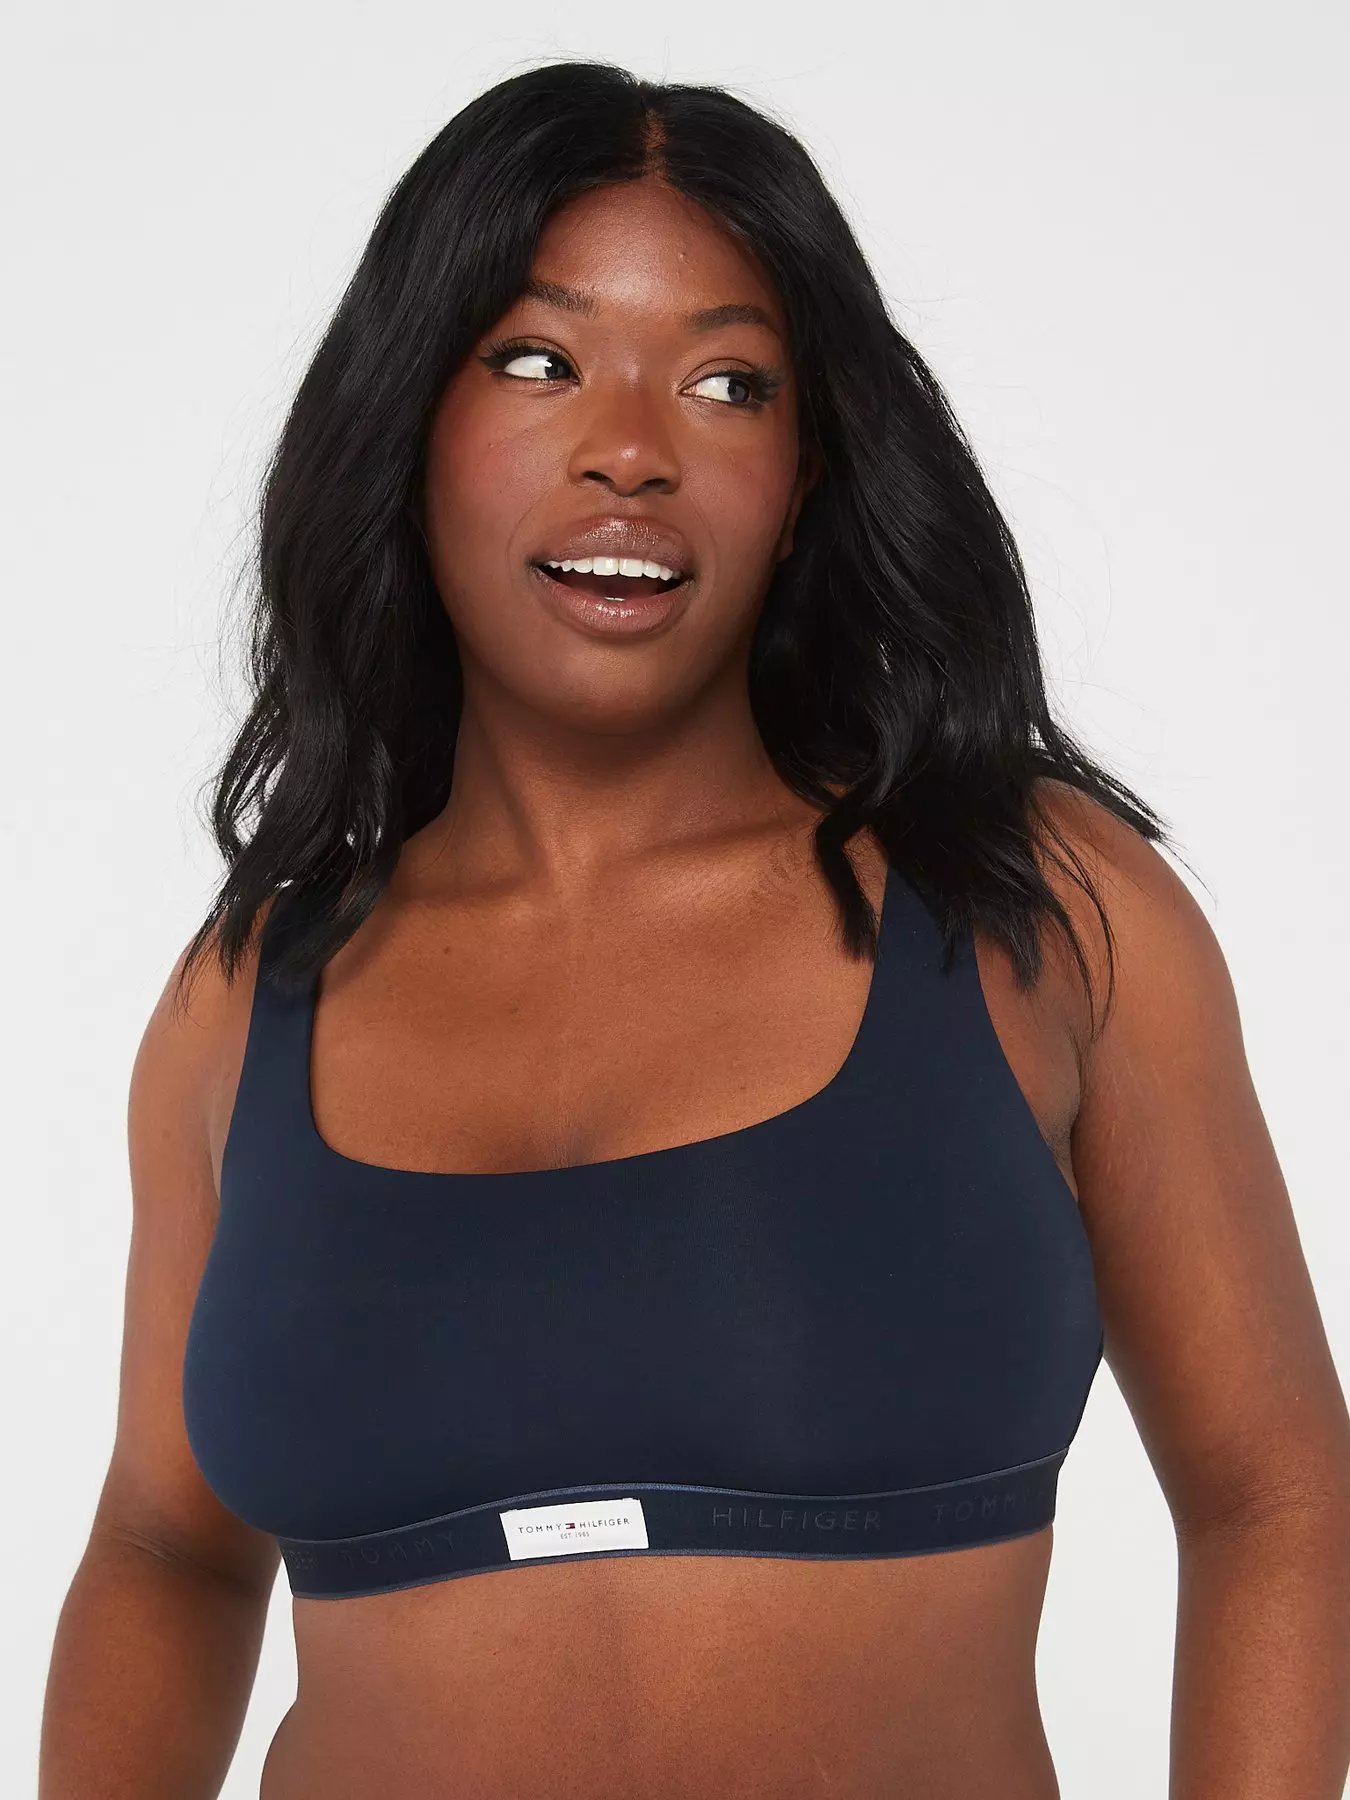 74-Year-Old Shoppers Say This $7 Bra “Feels Like a Second Skin”